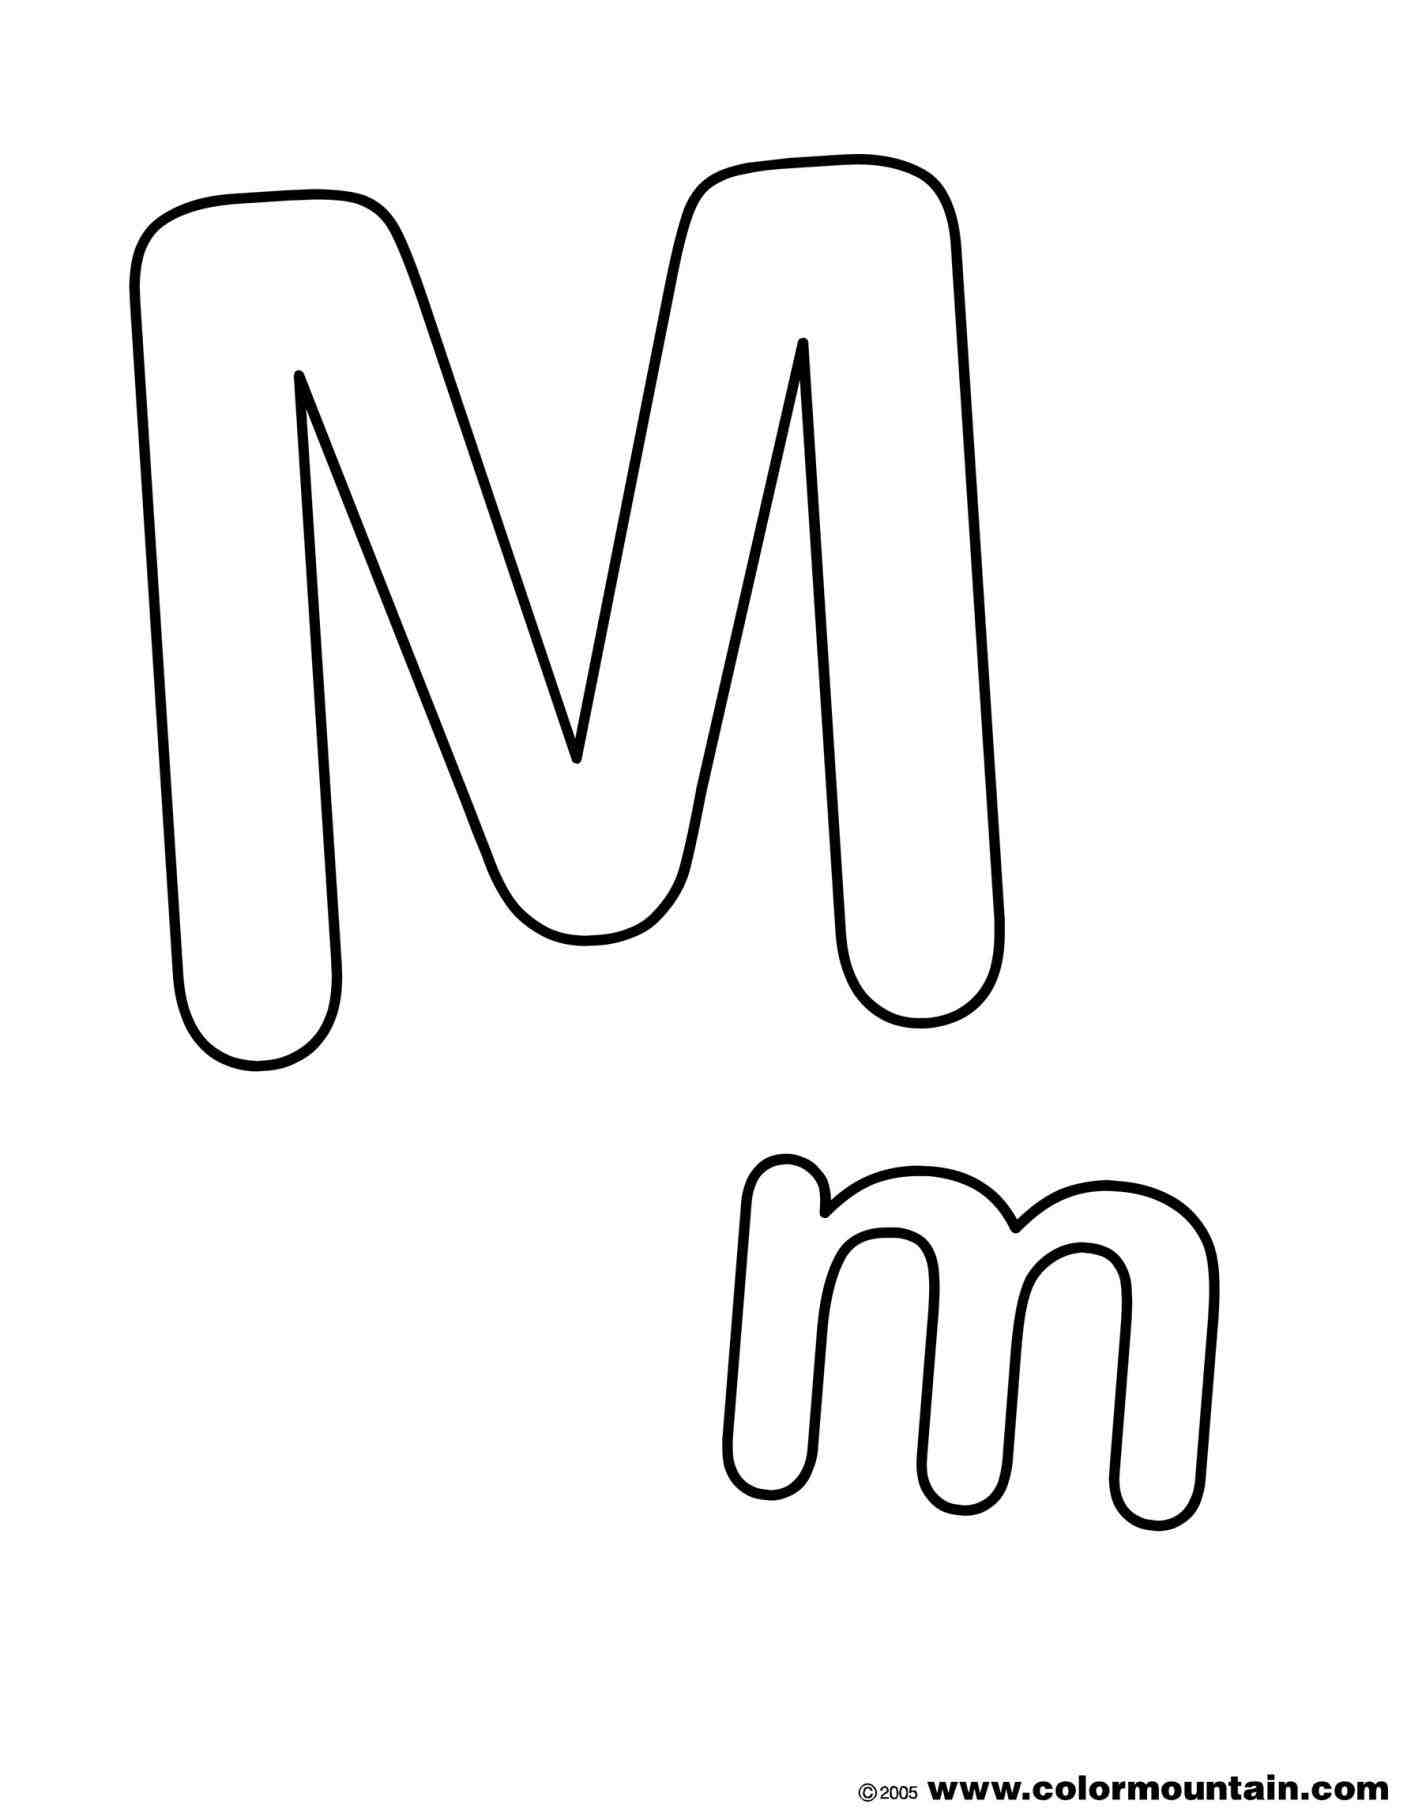 how to make a bubble letter m | weeklyplanner.website